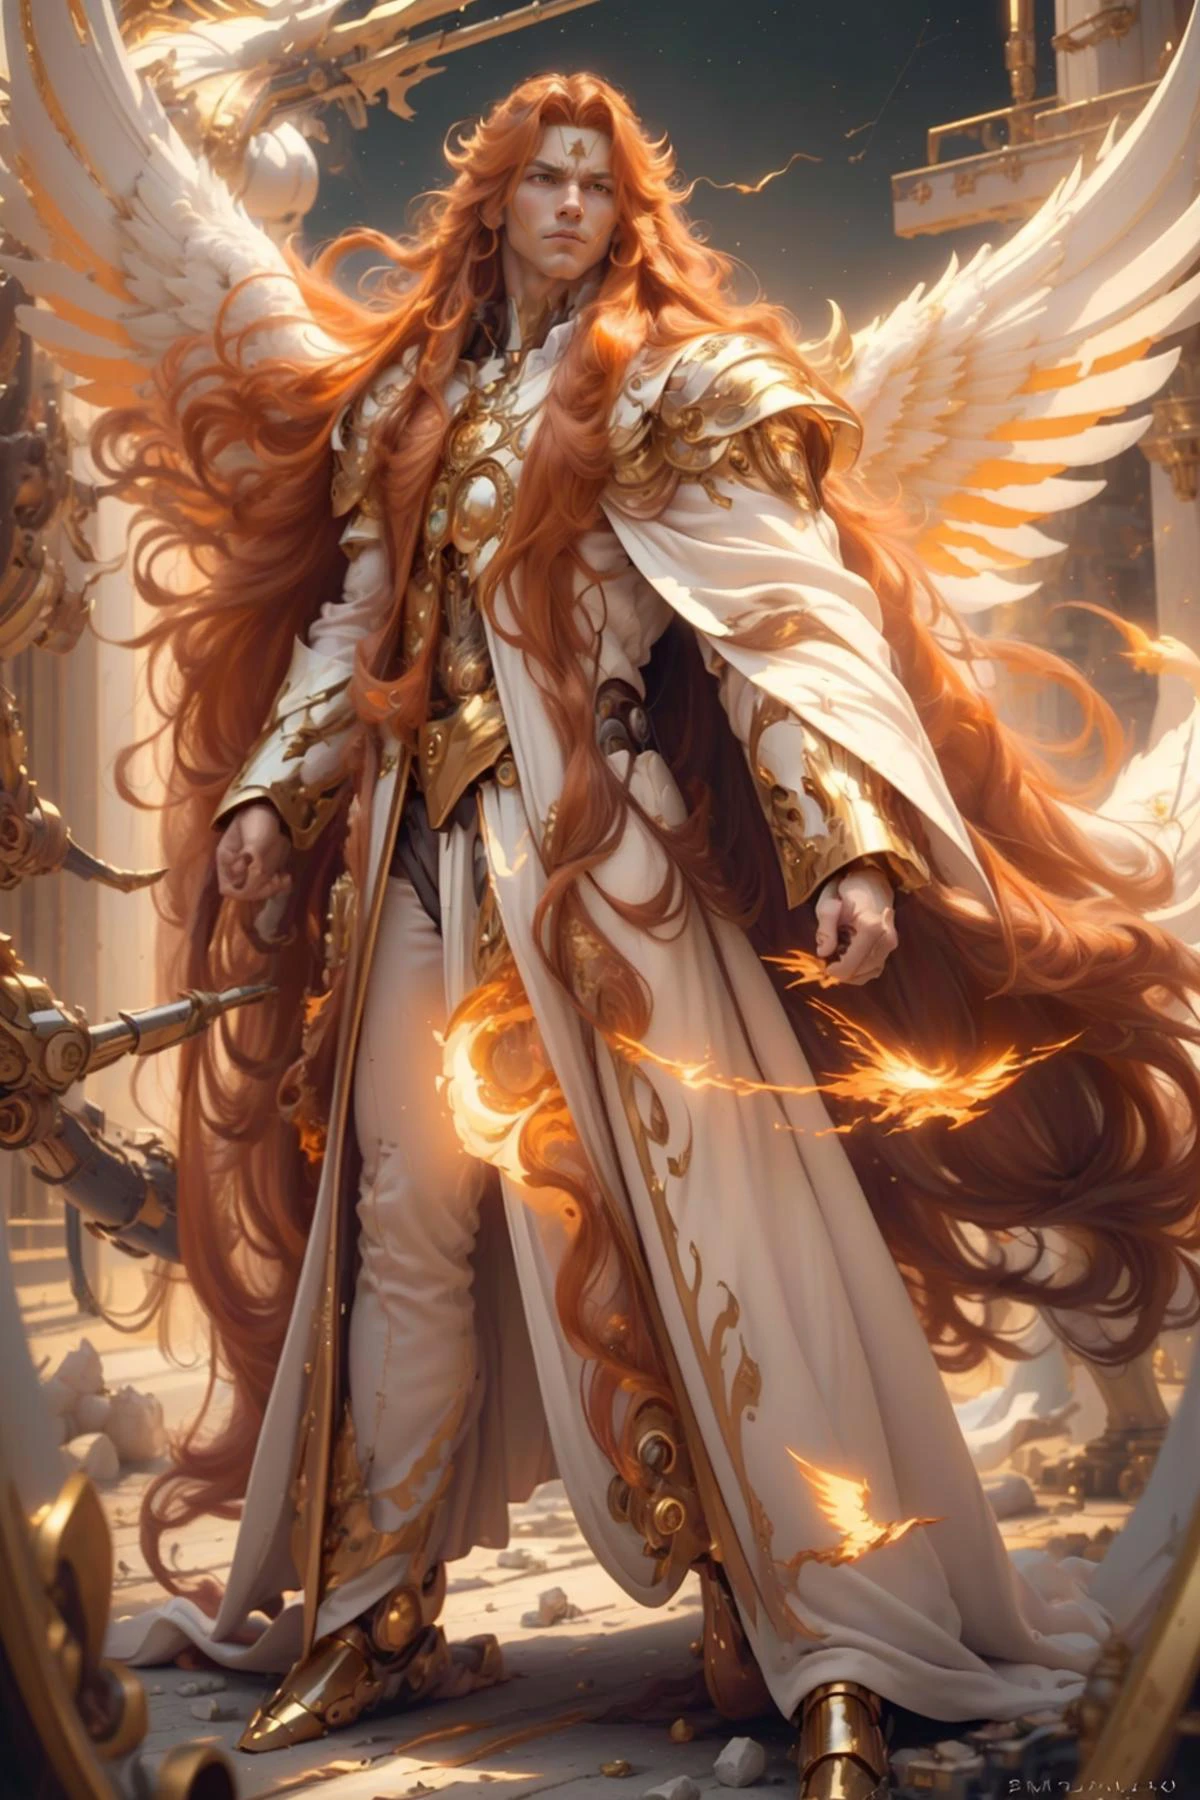 (((man))),(angry face:0.8), (mechanical wings:1.4),(colorful, dynamic angle, soft light passing through hair), wearing ((white robes:1.2)) ((cloak:1.2)), Scenario, ((orange hair)), imposing look, full body, (detailed realistic background:1.3), (official art, beautiful and aesthetic:1.2), Saint Seiya Shine Golden Pikachu constellation Cloth holding, Background zodiac signs hll,,
IvoryGoldAI,
